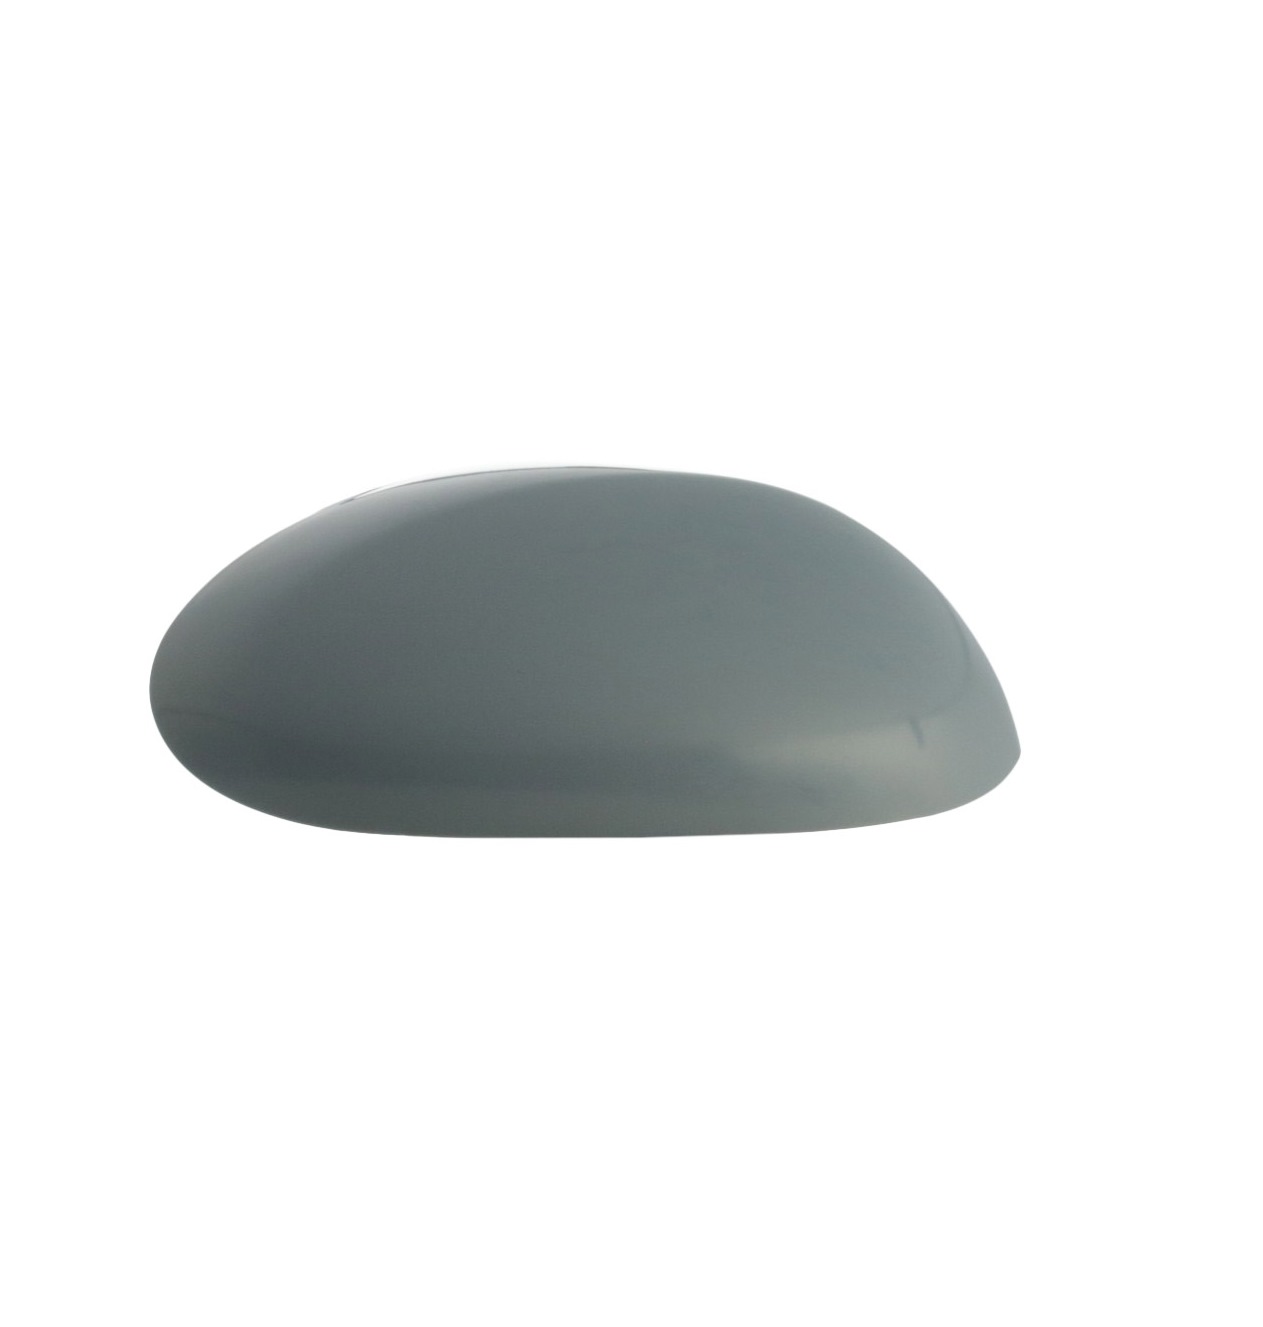 Peugeot Cover, outside mirror ALKAR 6312857 at a good price